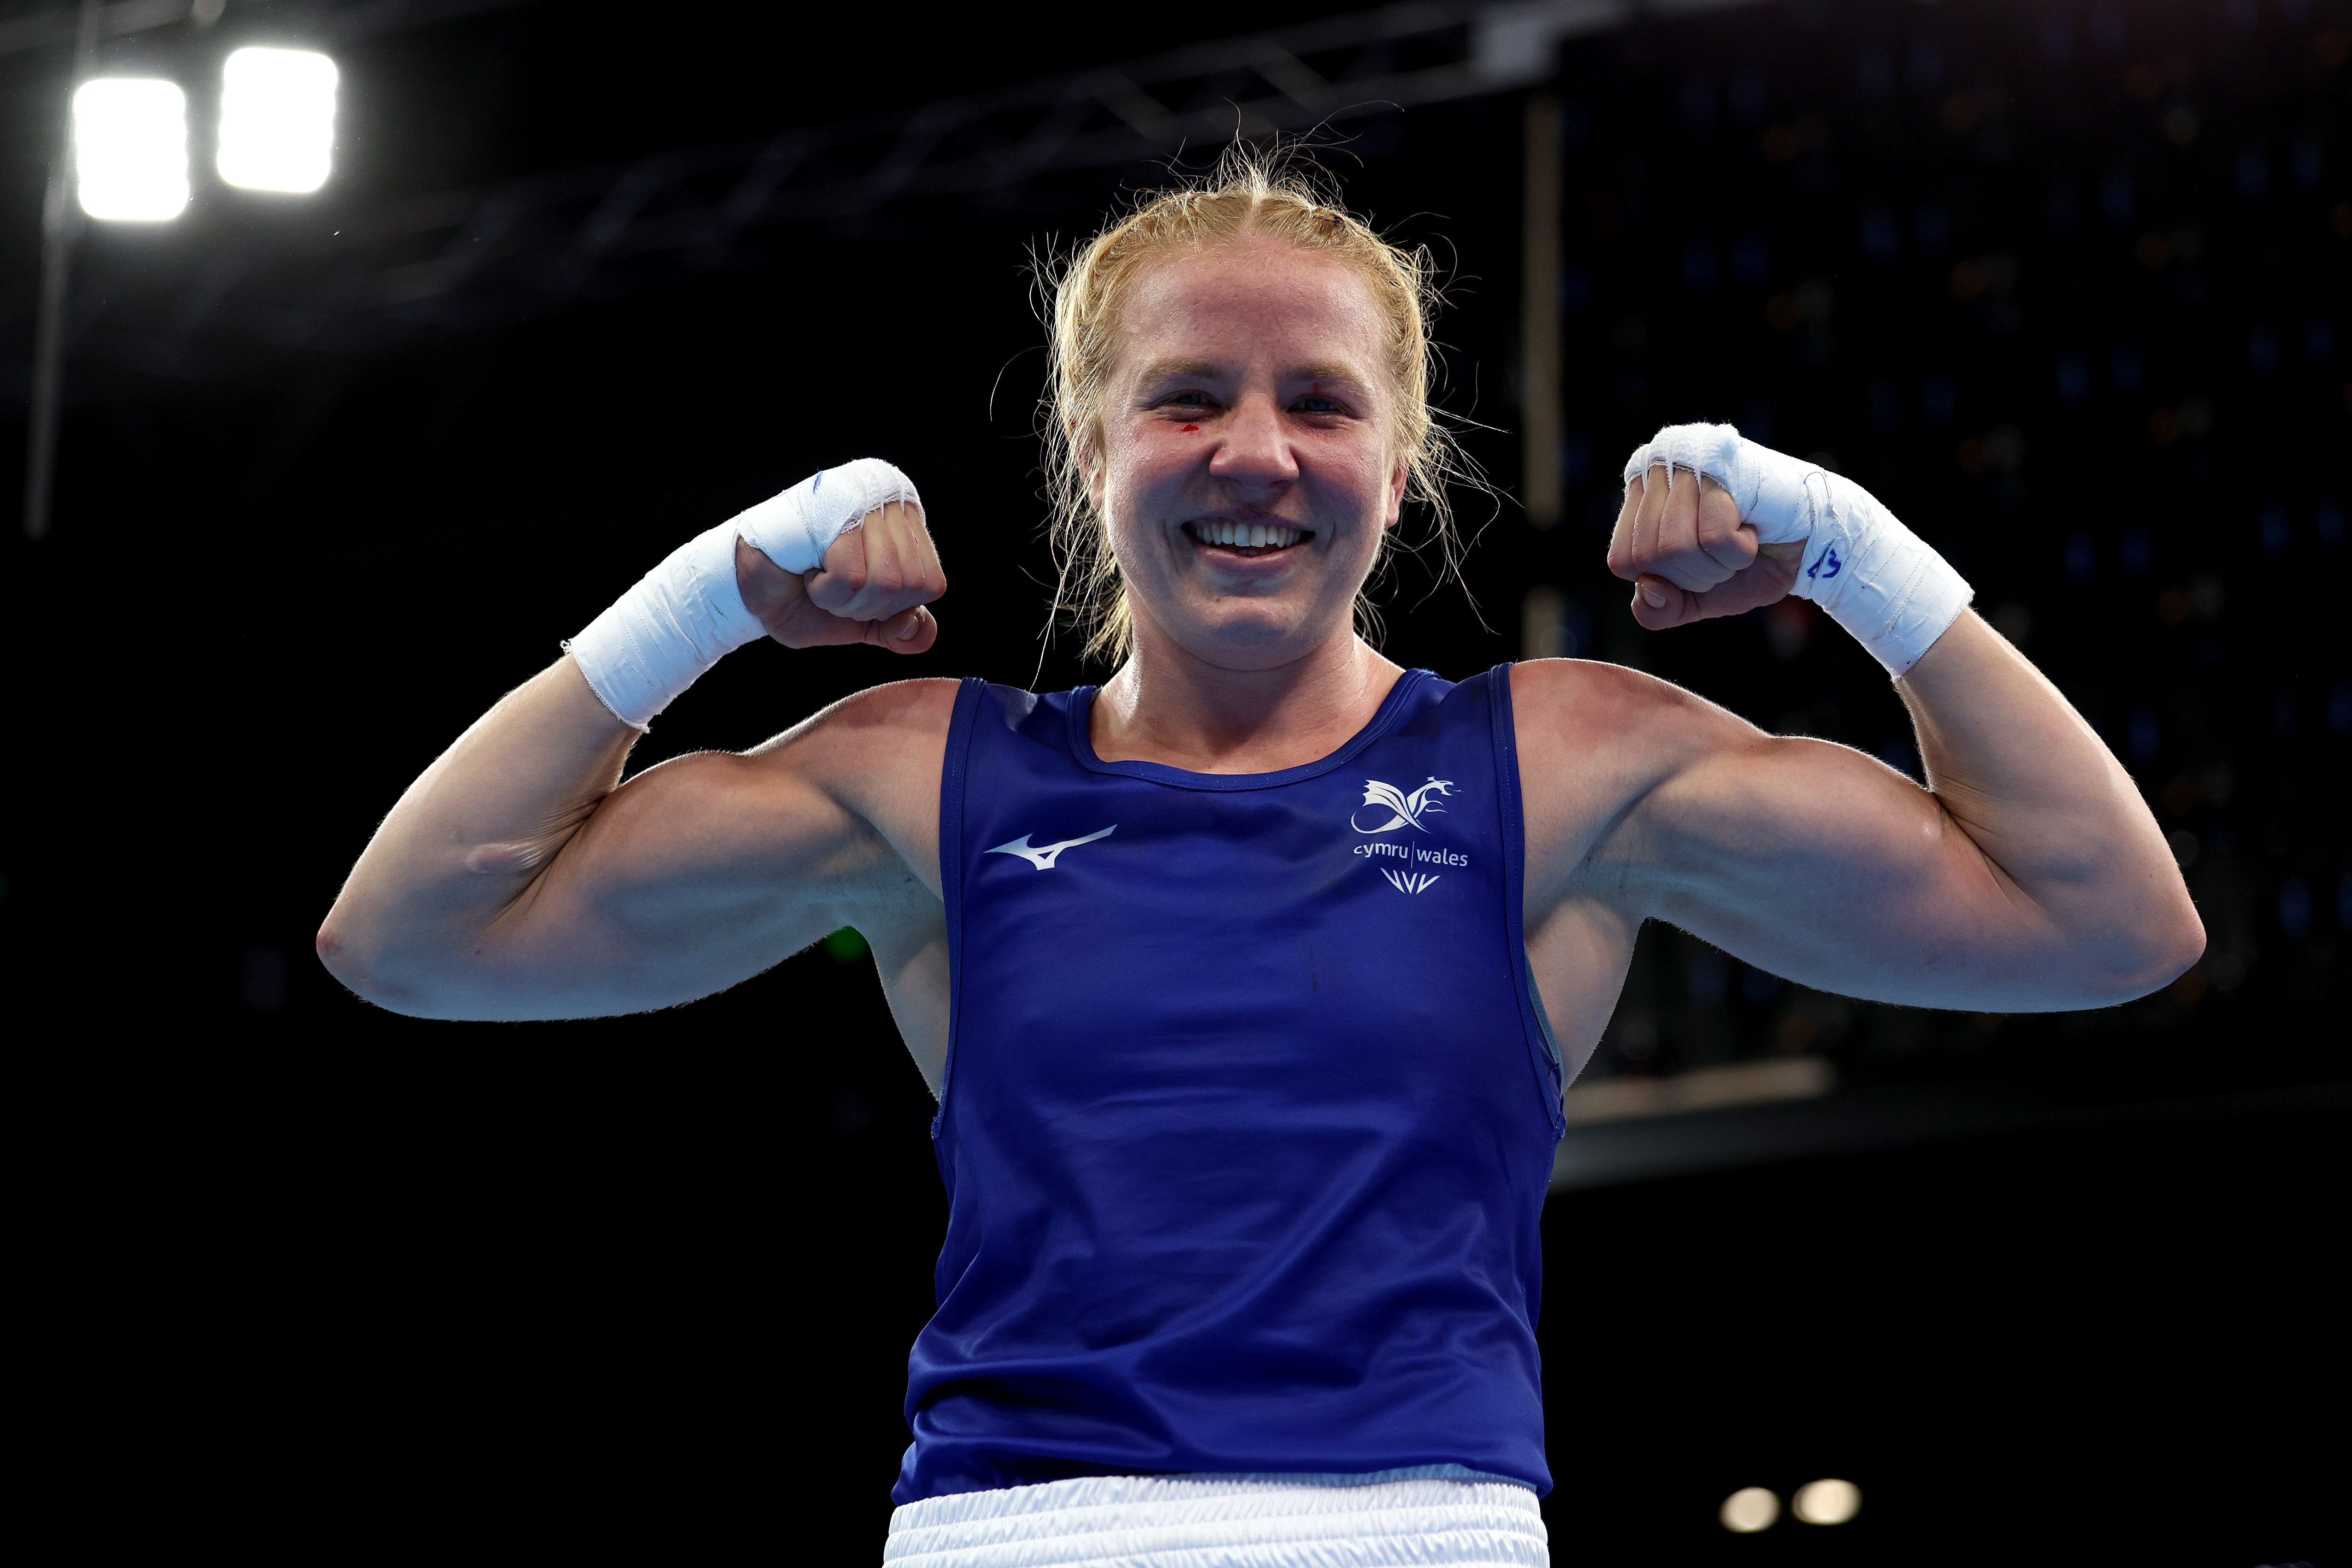 Rosie Eccles took gold at the Commonwealth Games in Birmingham in 2022